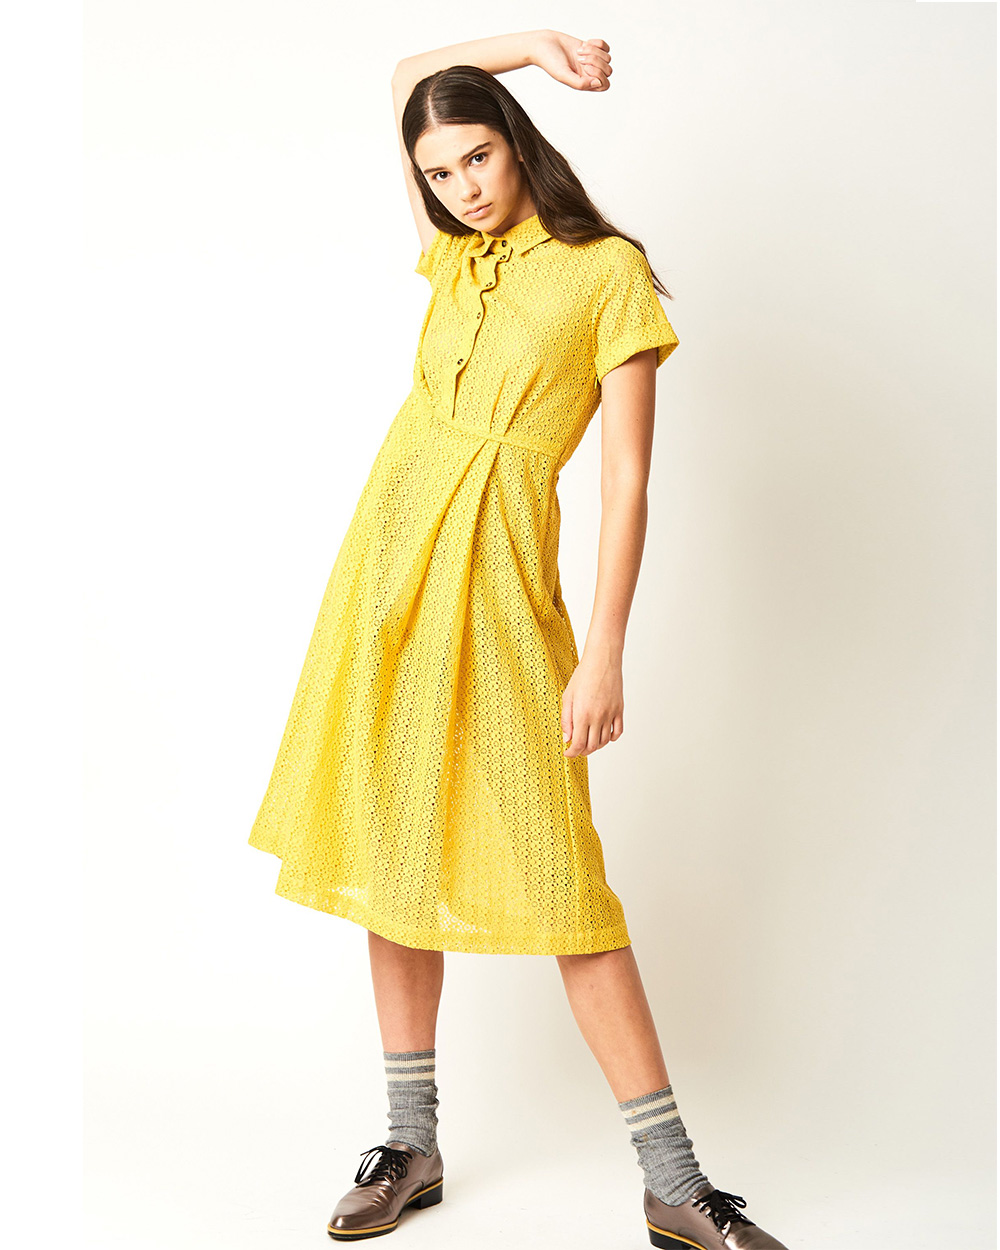 Pebbles dress, now $255 (was $369) from Kate Sylvester